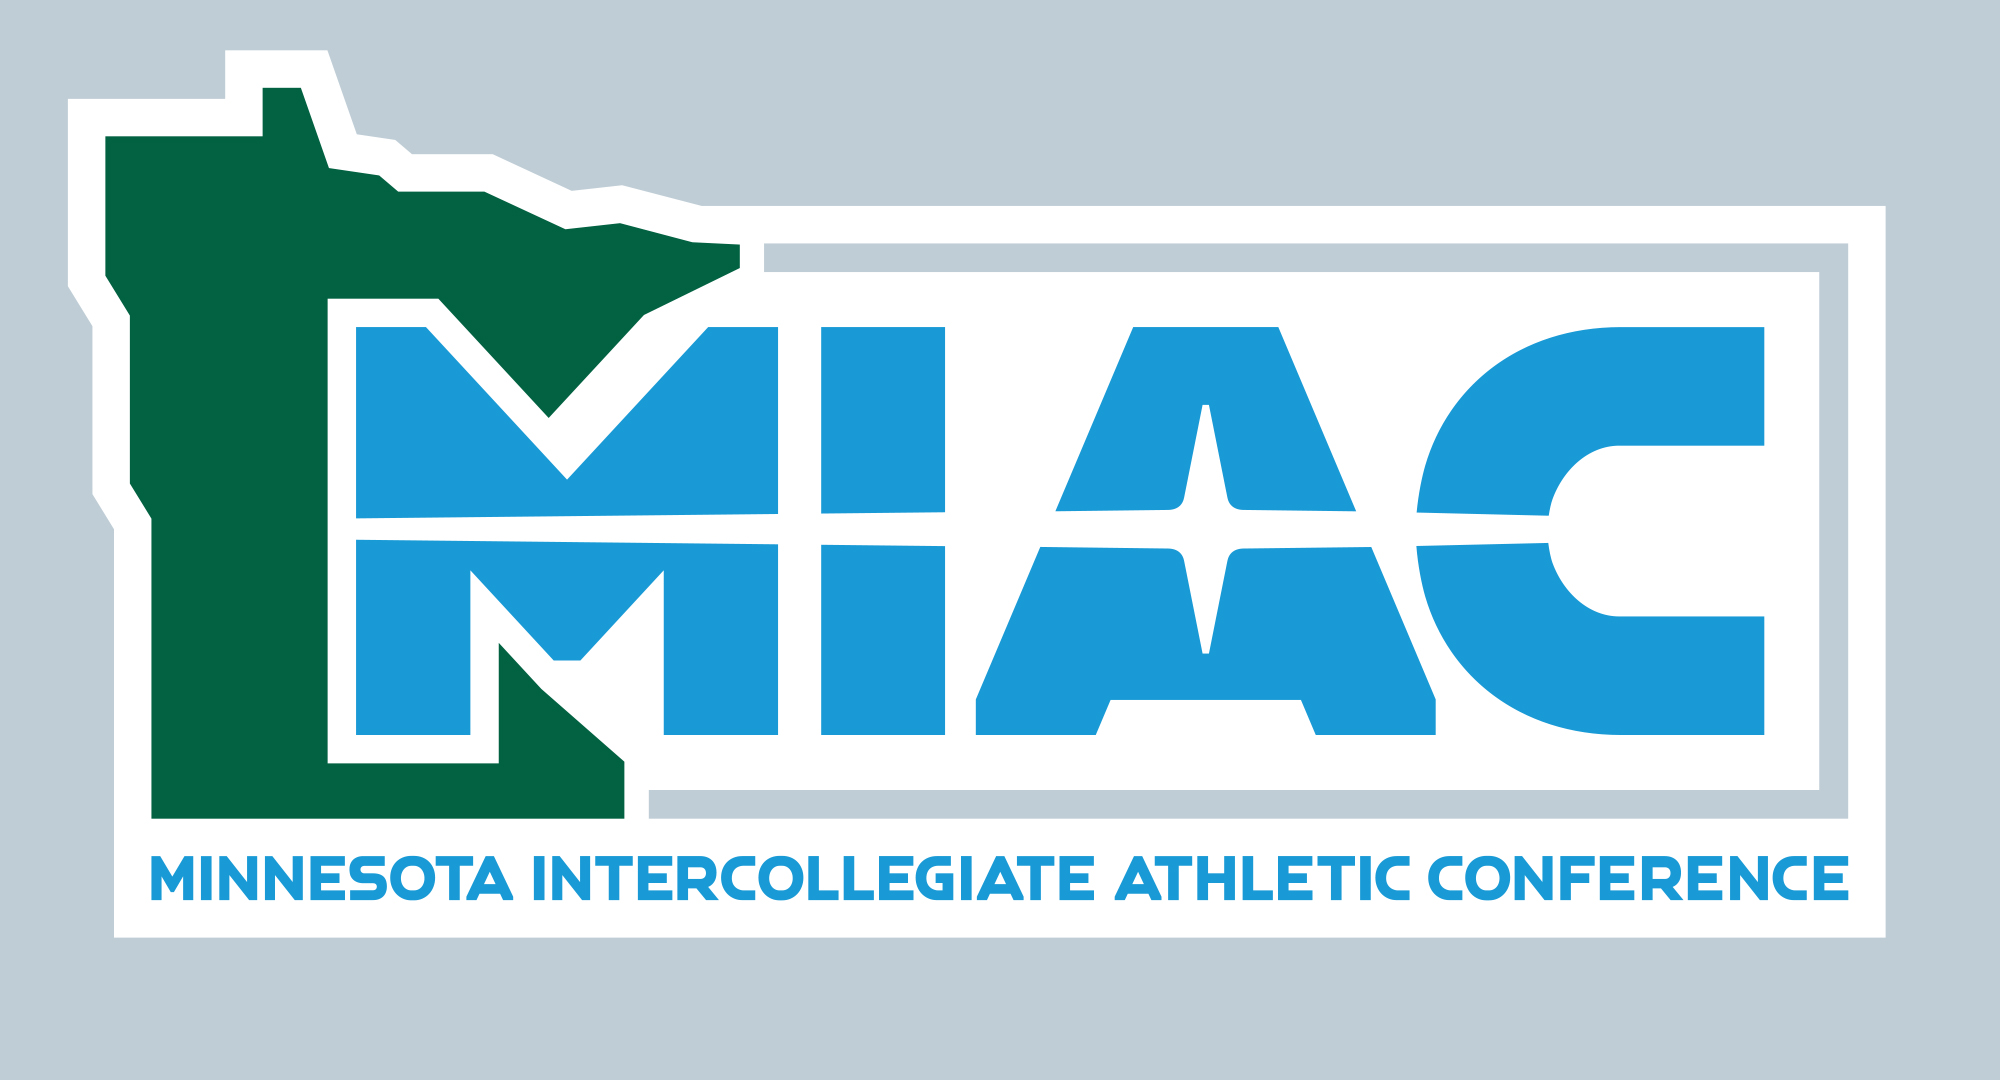 The MIAC office cancelled the 2020 regular season and postseason championships for spring sports.